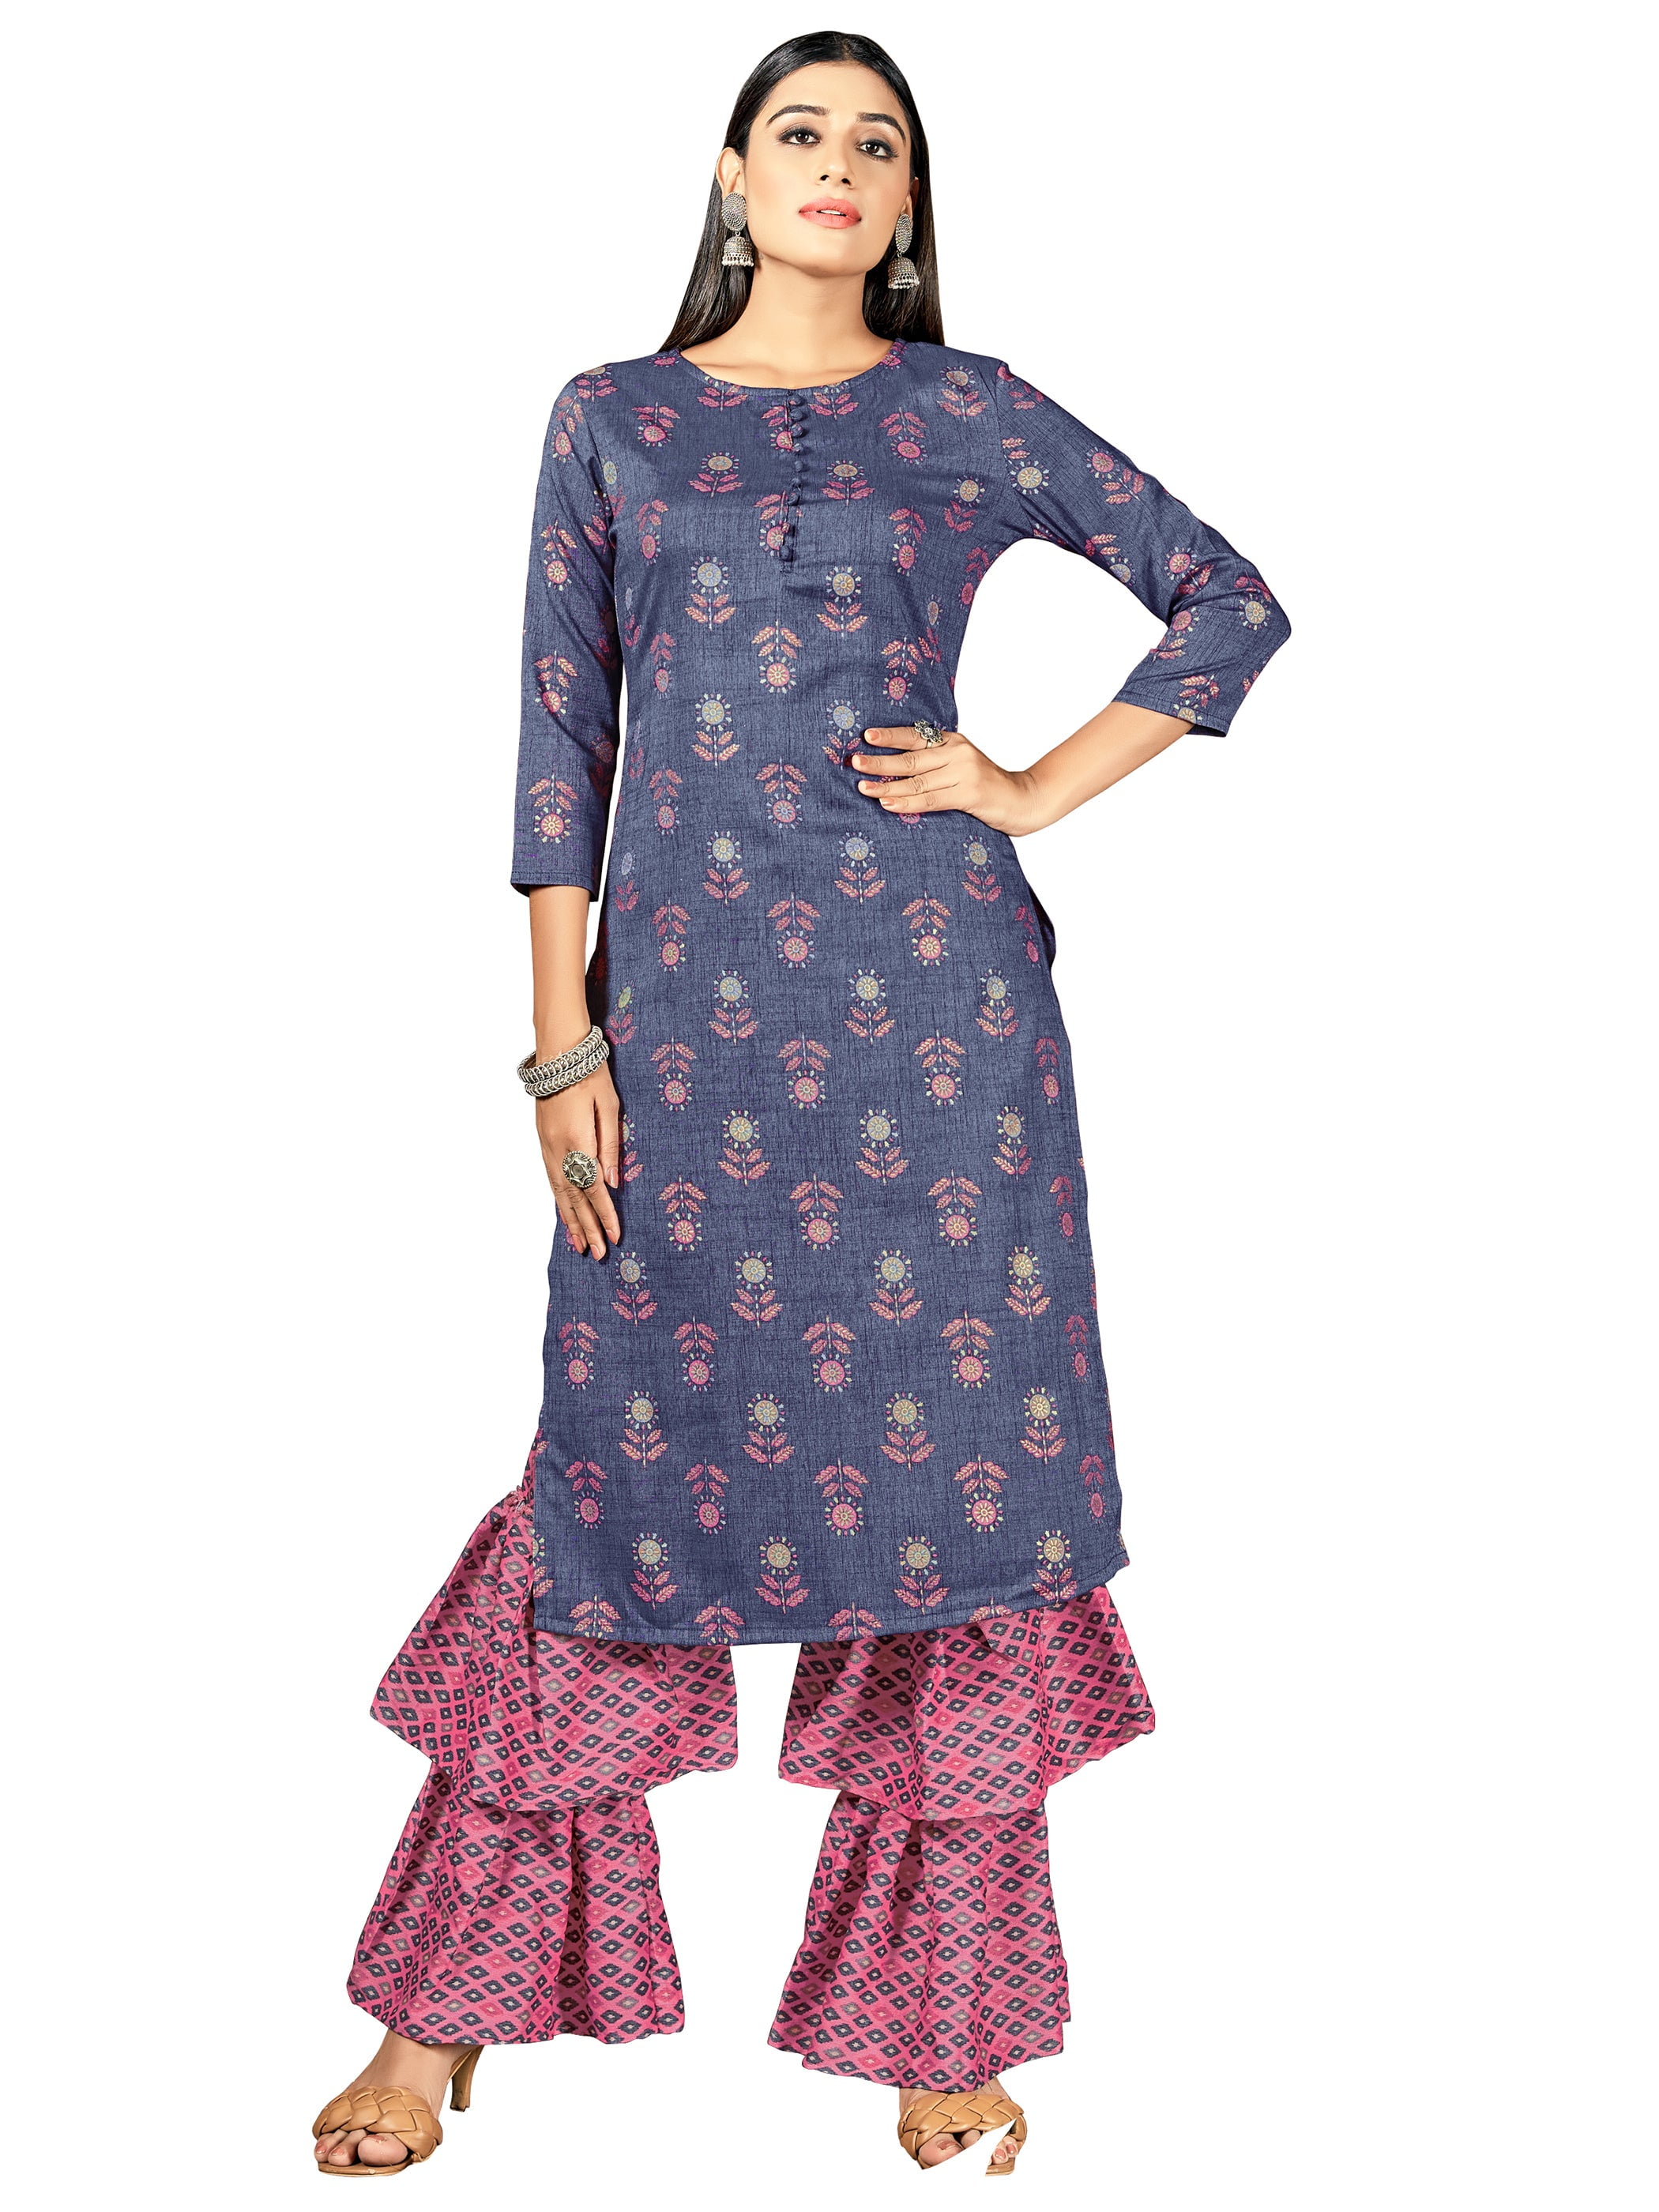 Burgundy Color Stitched Rayon Latest Printed Design Kurti Plazo For Women -  Urban Trend